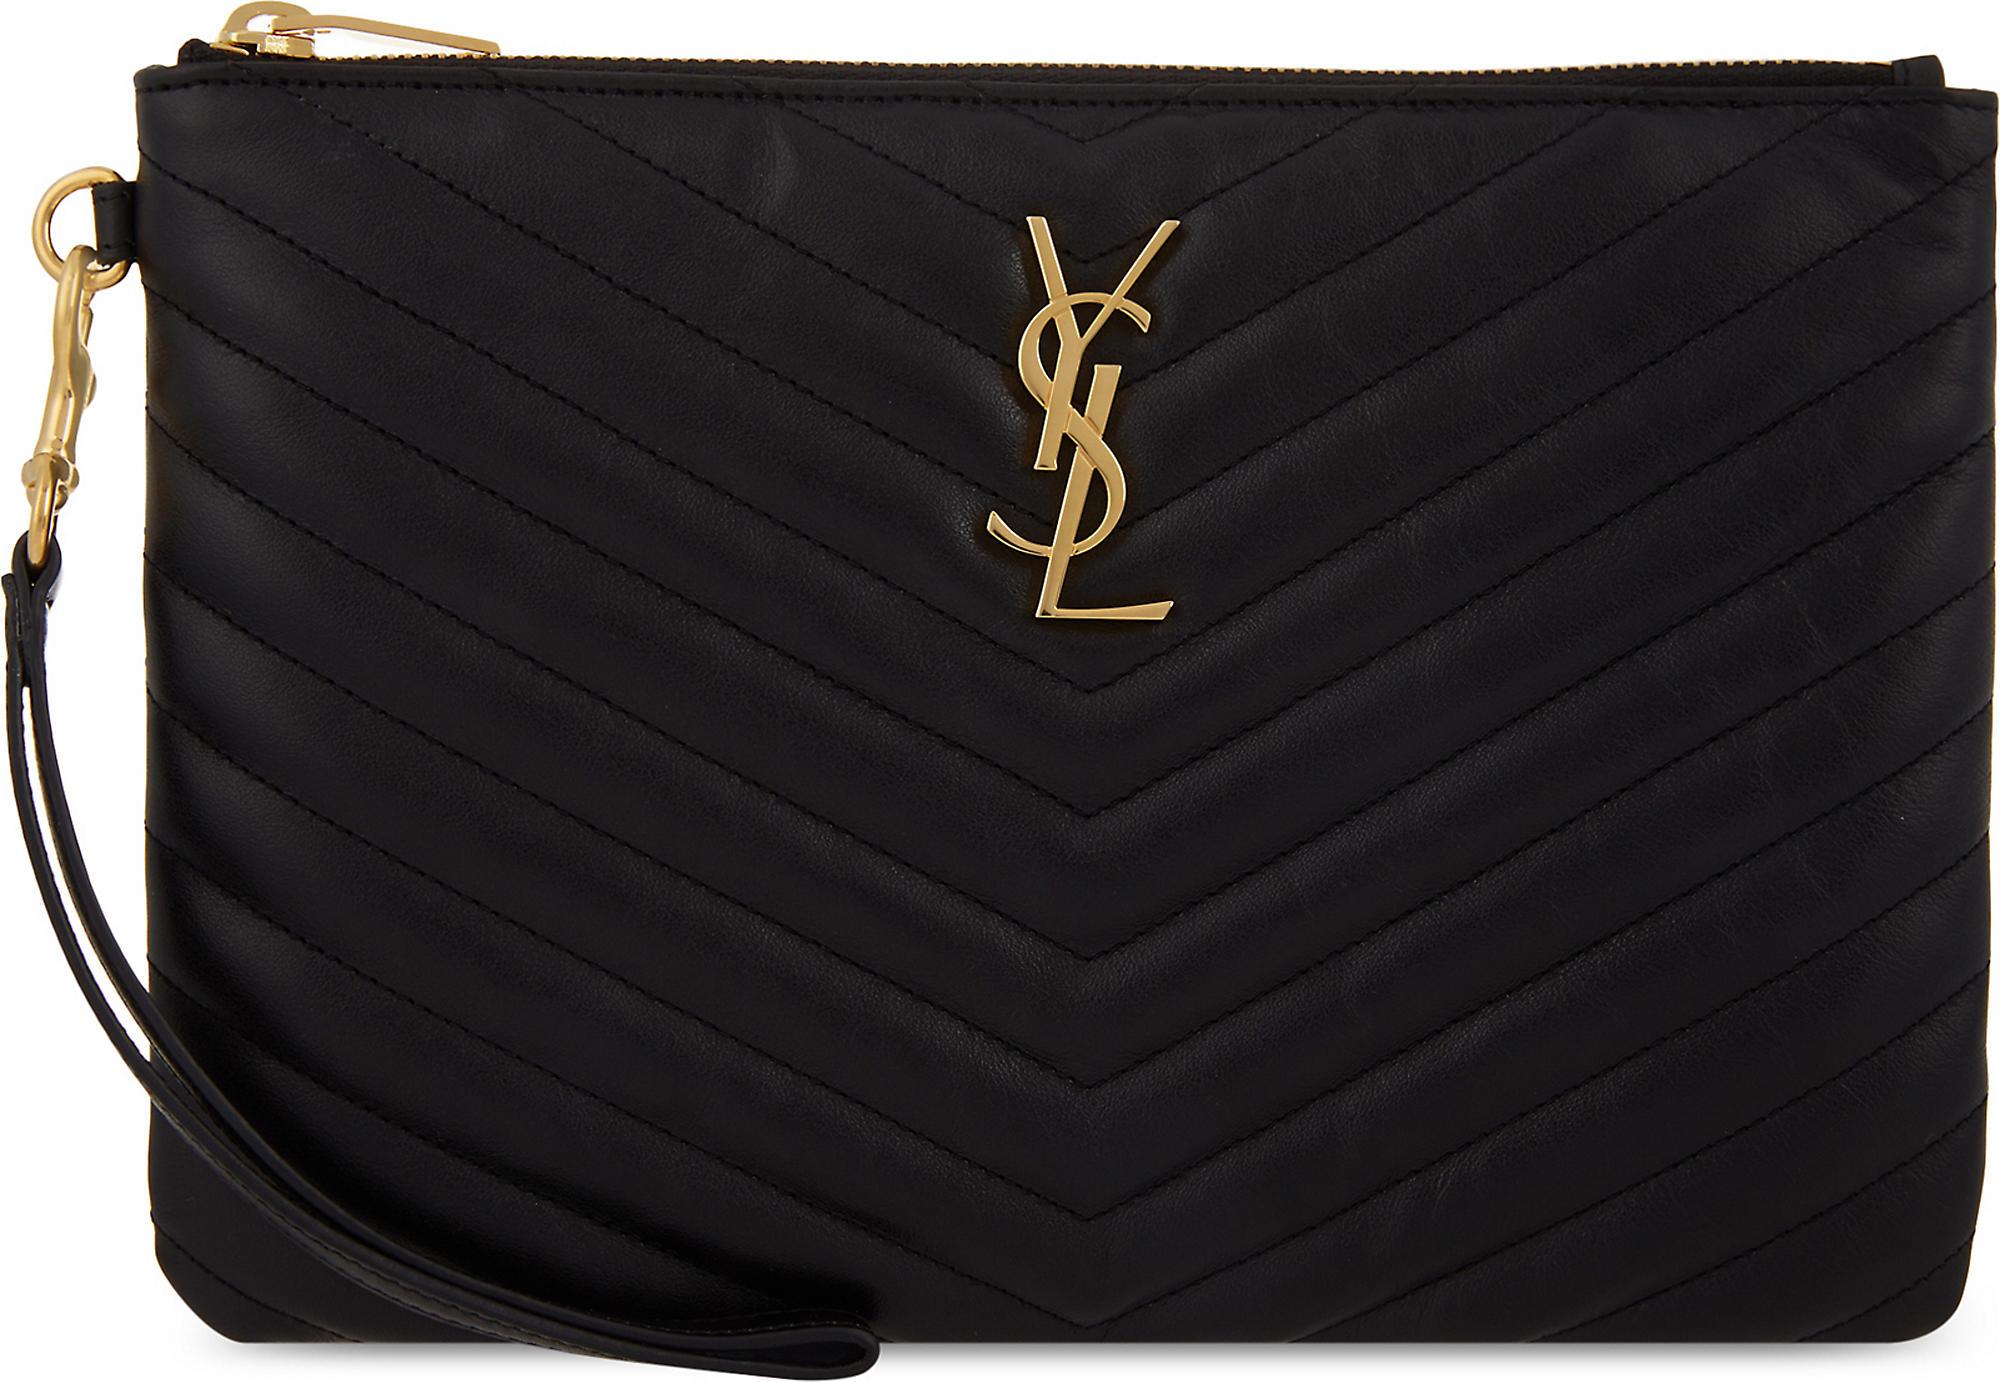 Saint Laurent Monogram Quilted Leather Pouch in Black